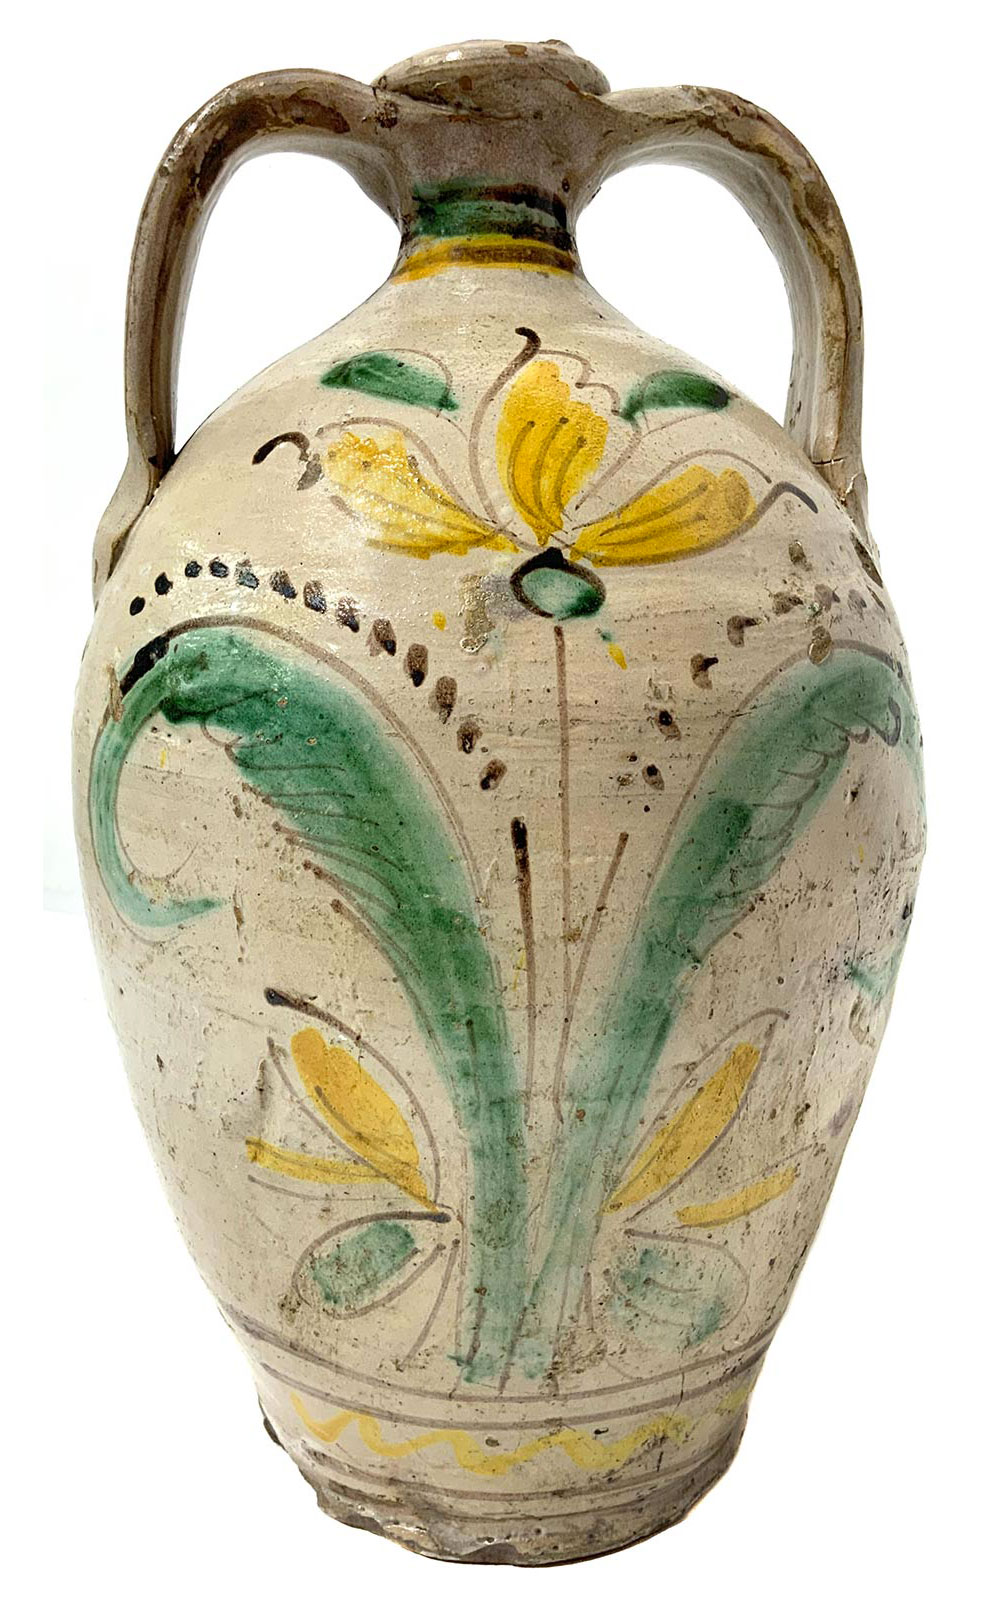 Jug" in Caltagirone majolica with handles, mid-nineteenth century. White tinted with green and